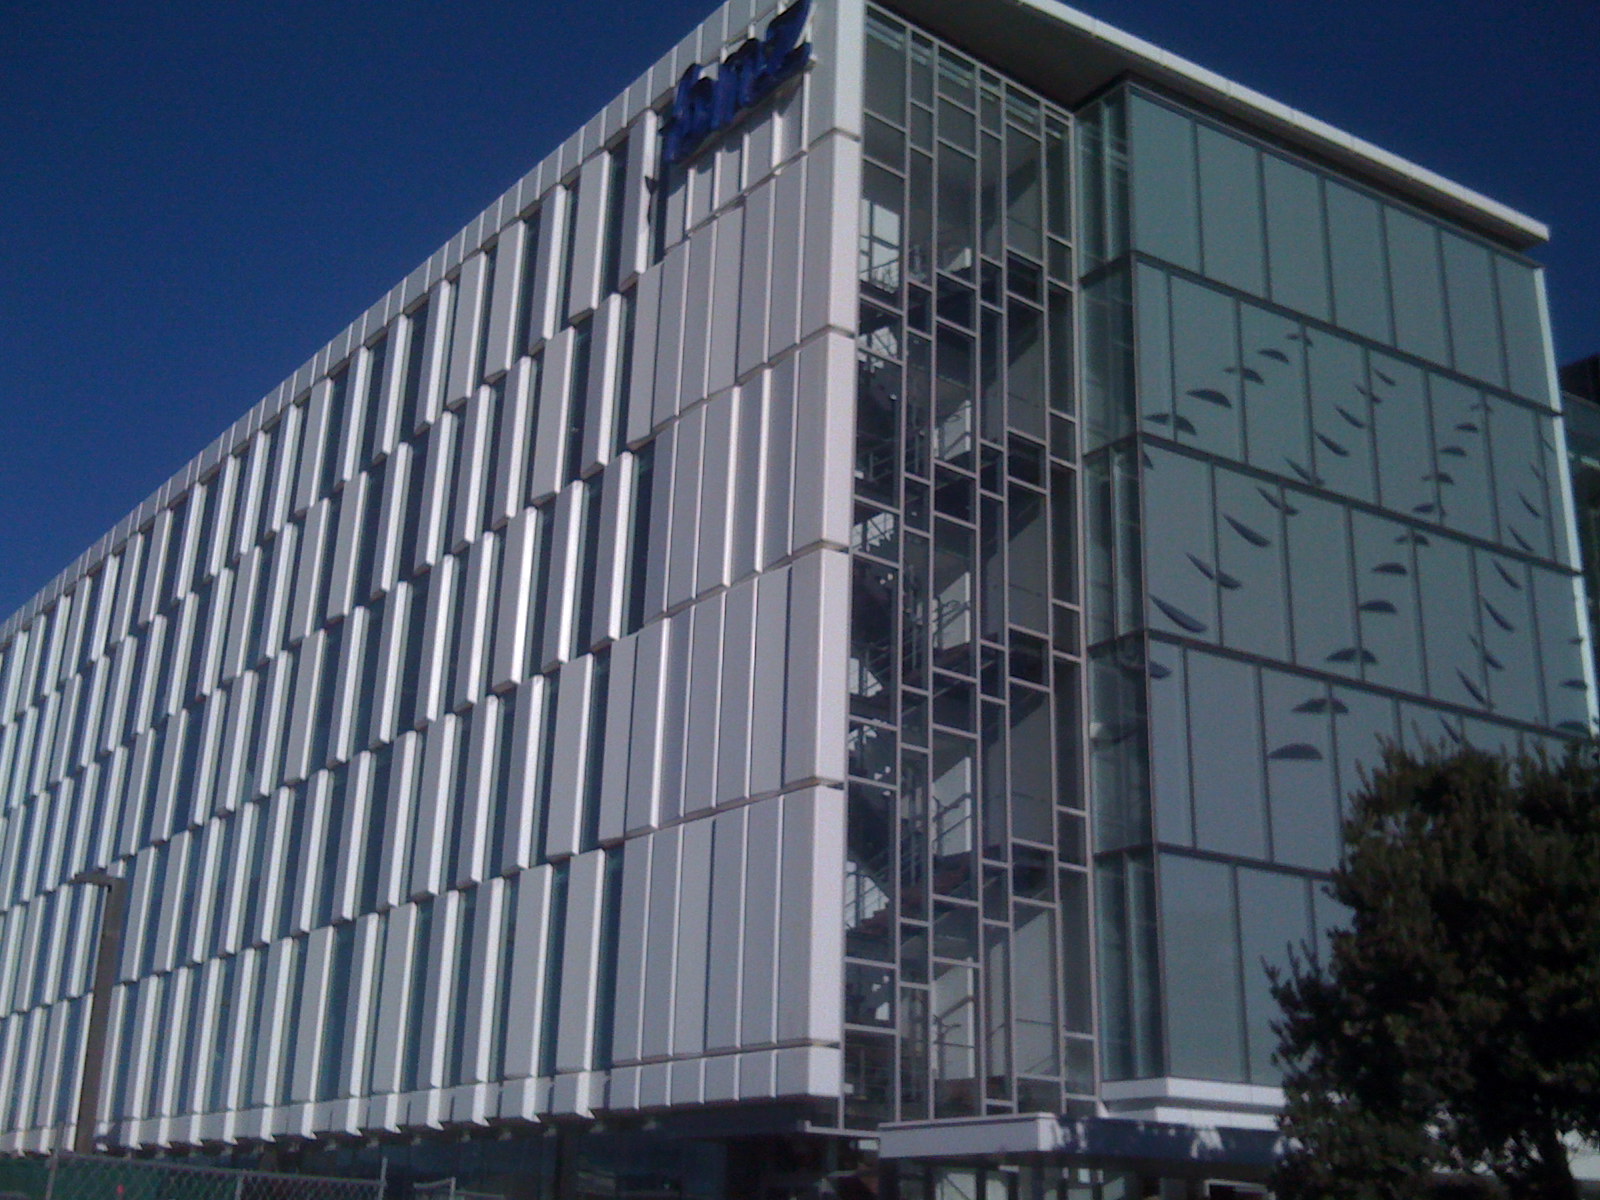 The new BNZ building is open,